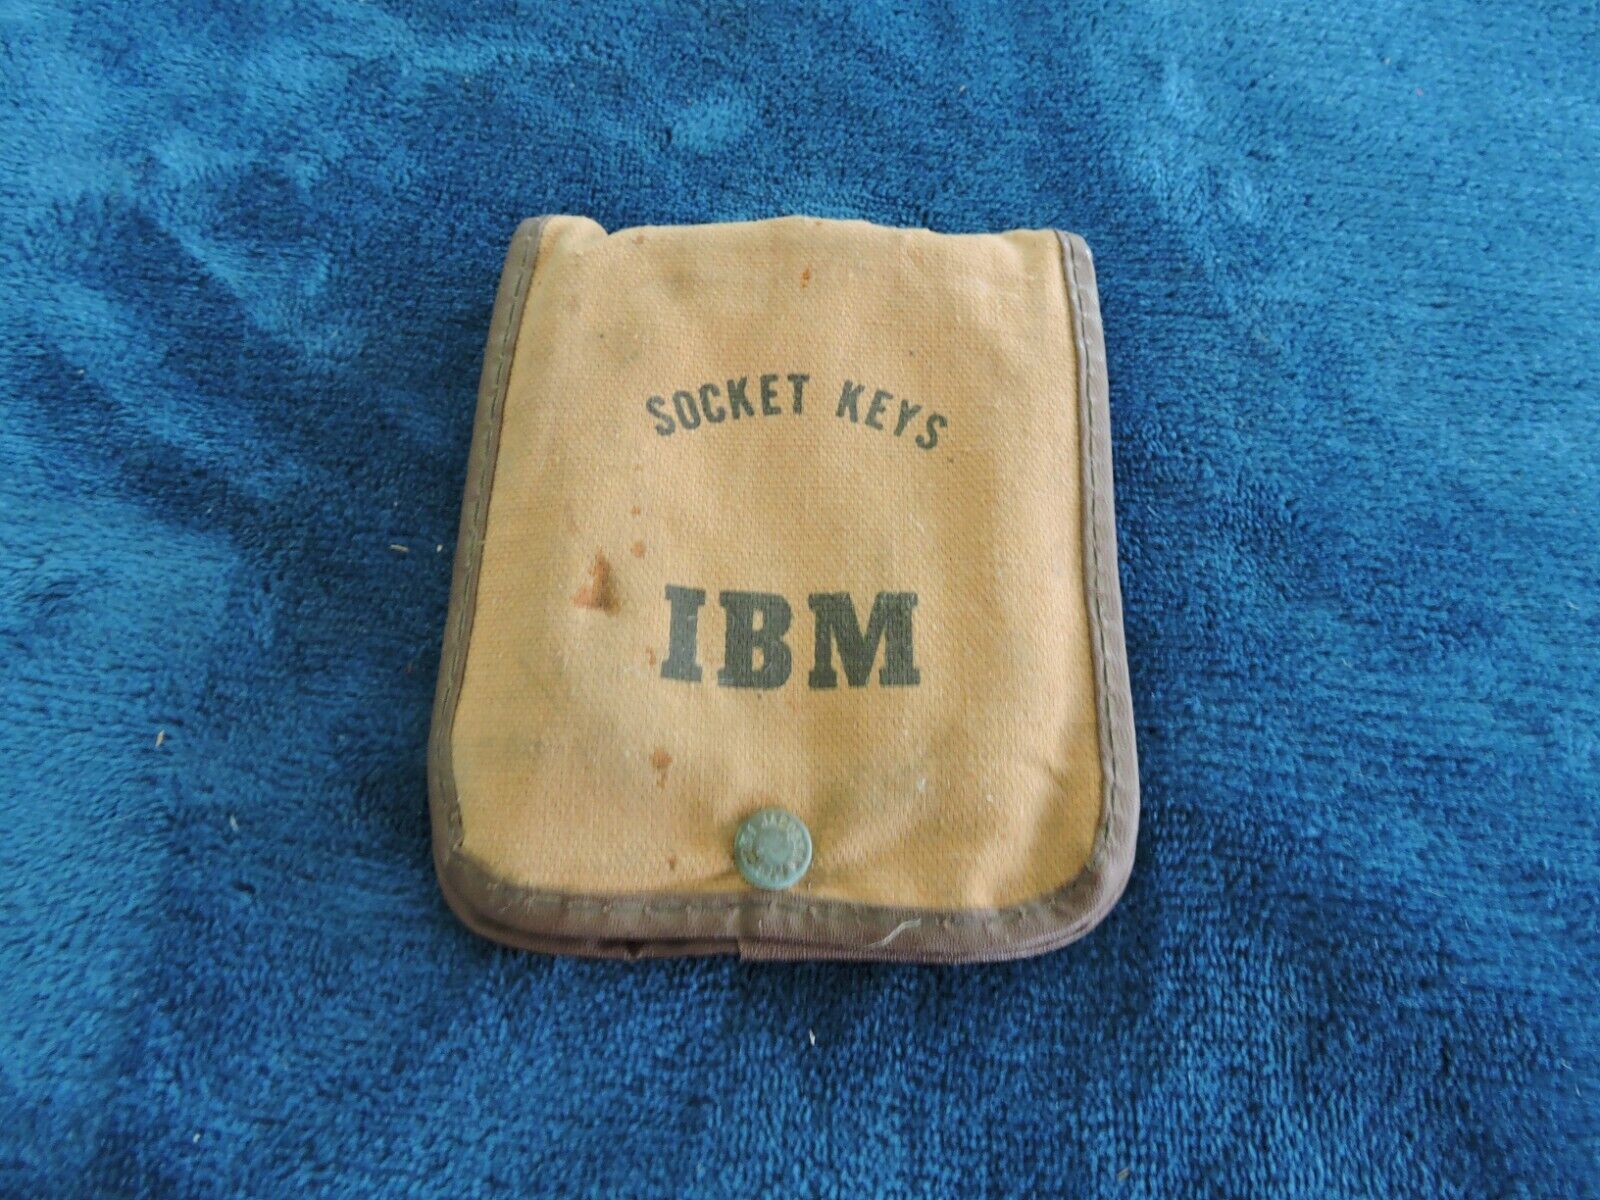 Vintage IBM Socket Keys Allen Wrench Hex Keys Tool Canvas Pouch Made in USA.